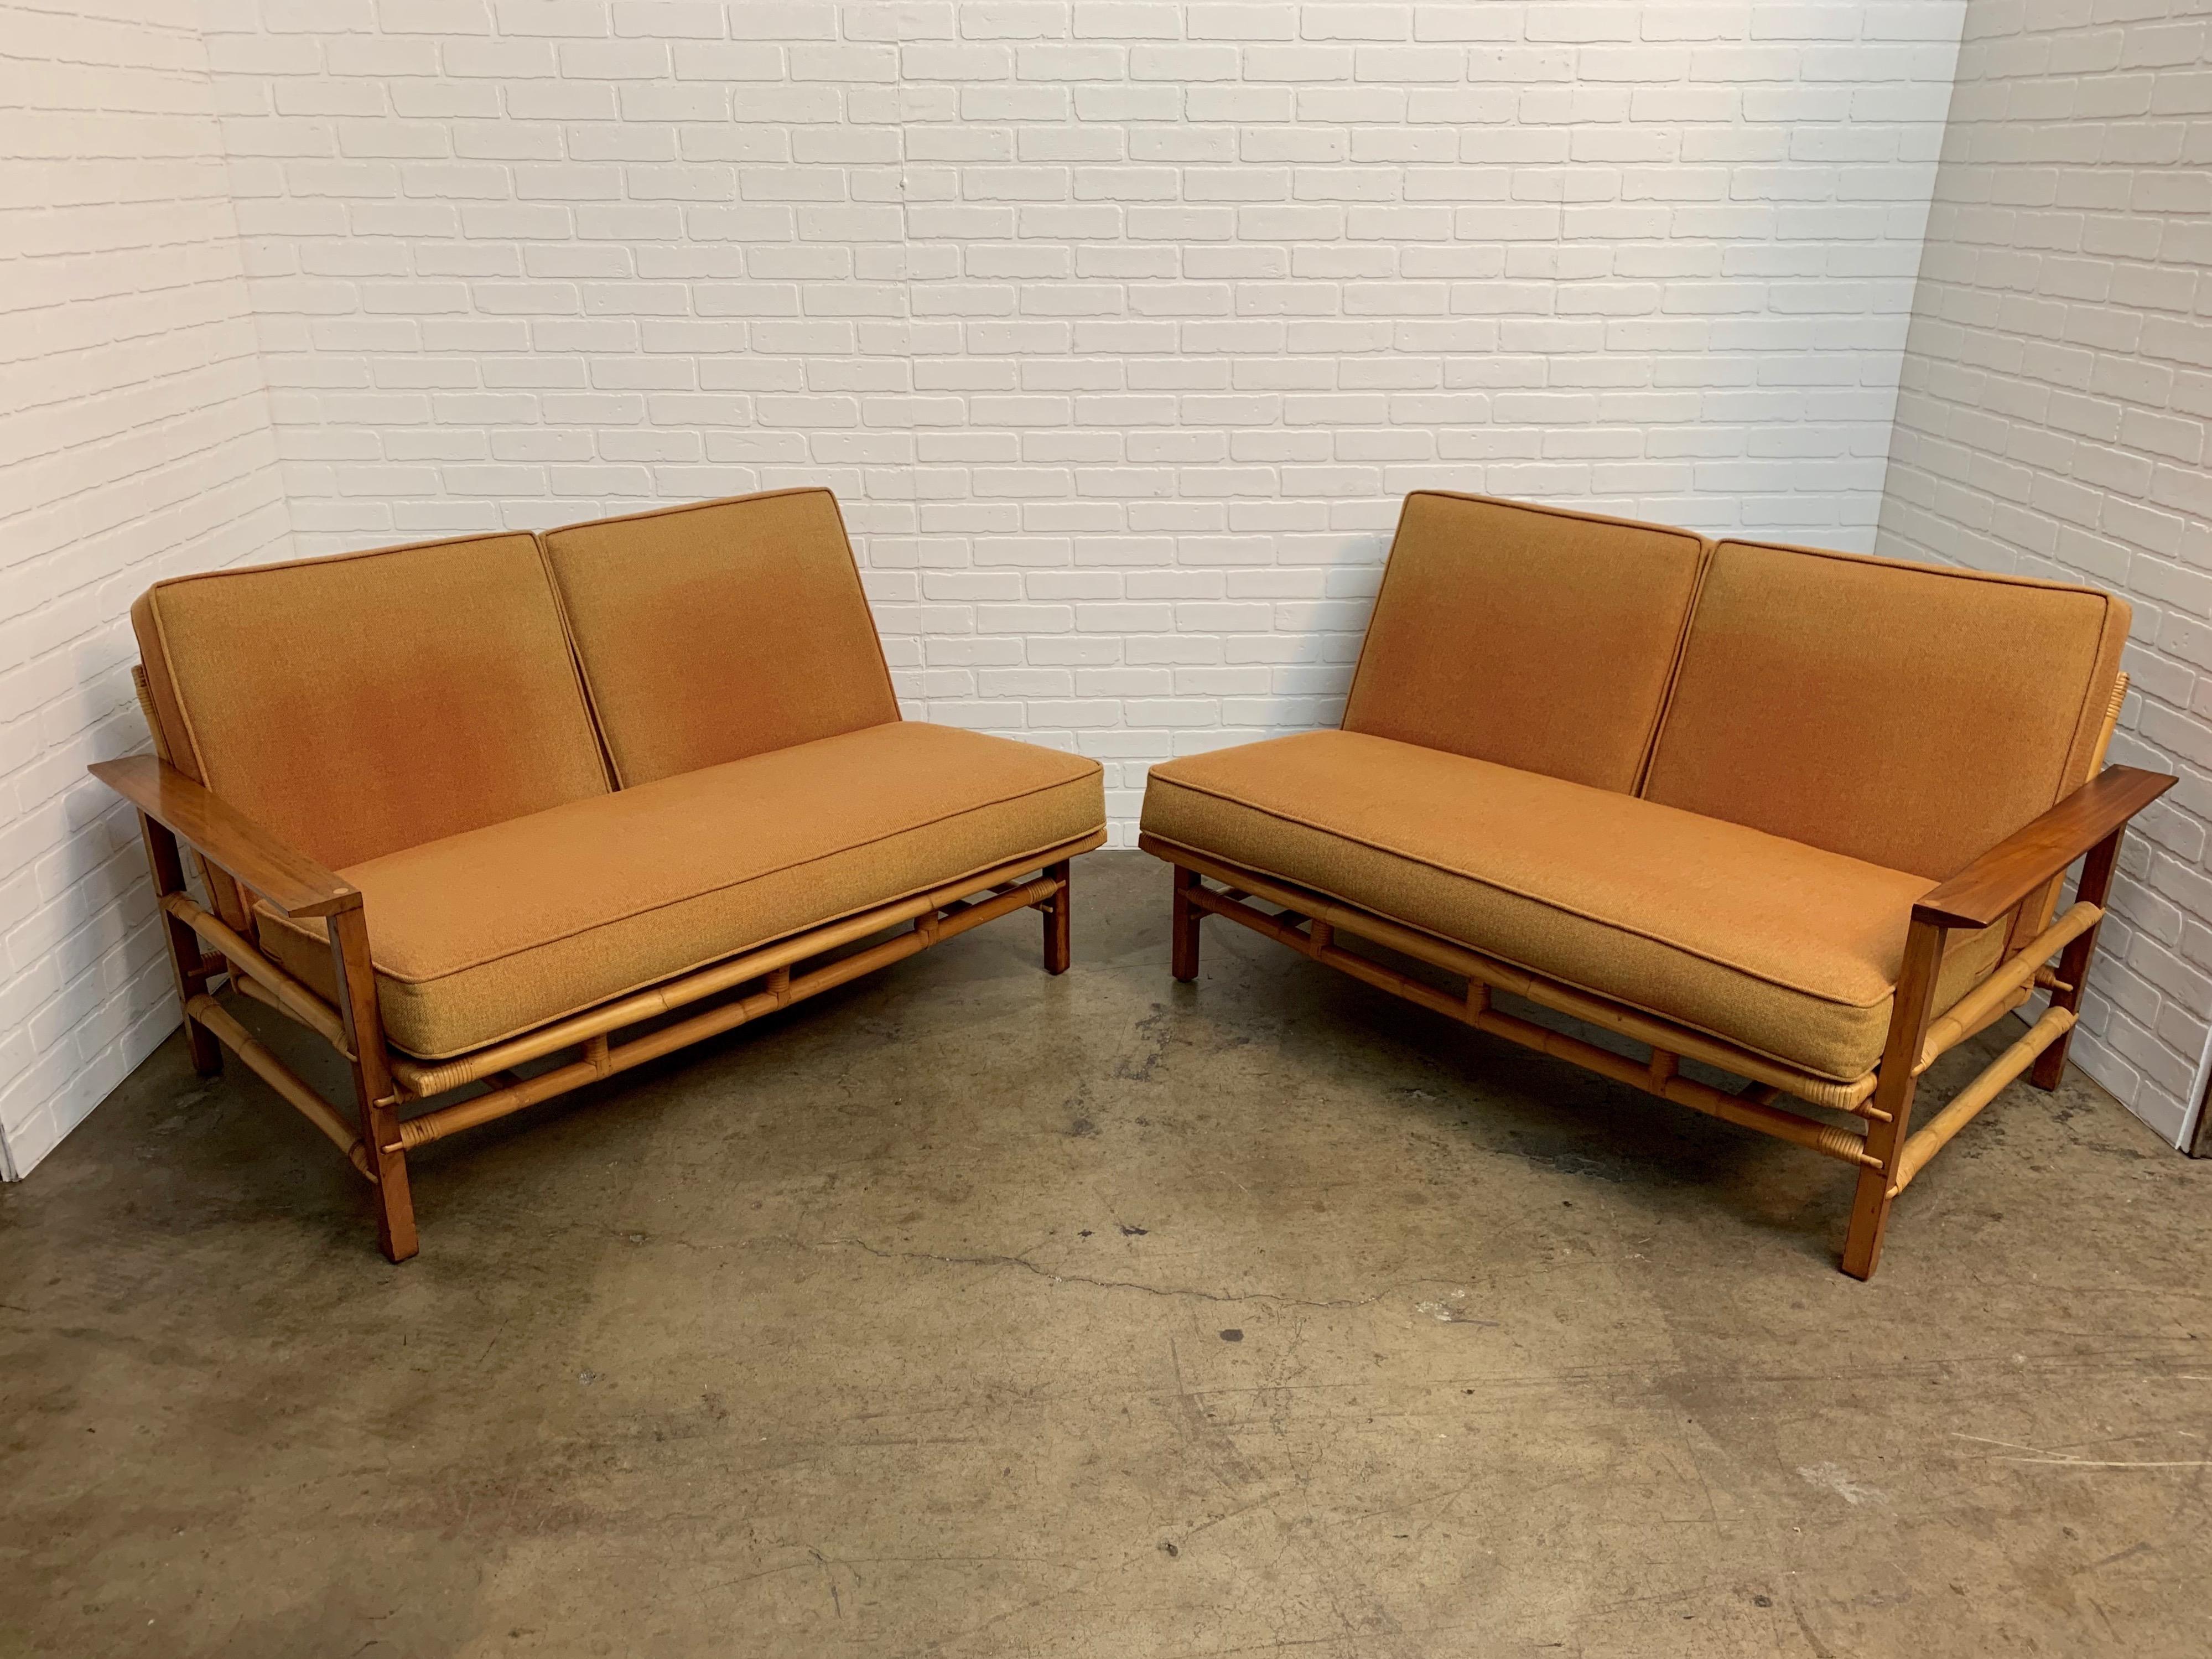 Rare combination of walnut with rattan love seats by Ficks Reed that can be used as one long sofa or as a corner unit or a pair 
Measurements with out cushions 26.75